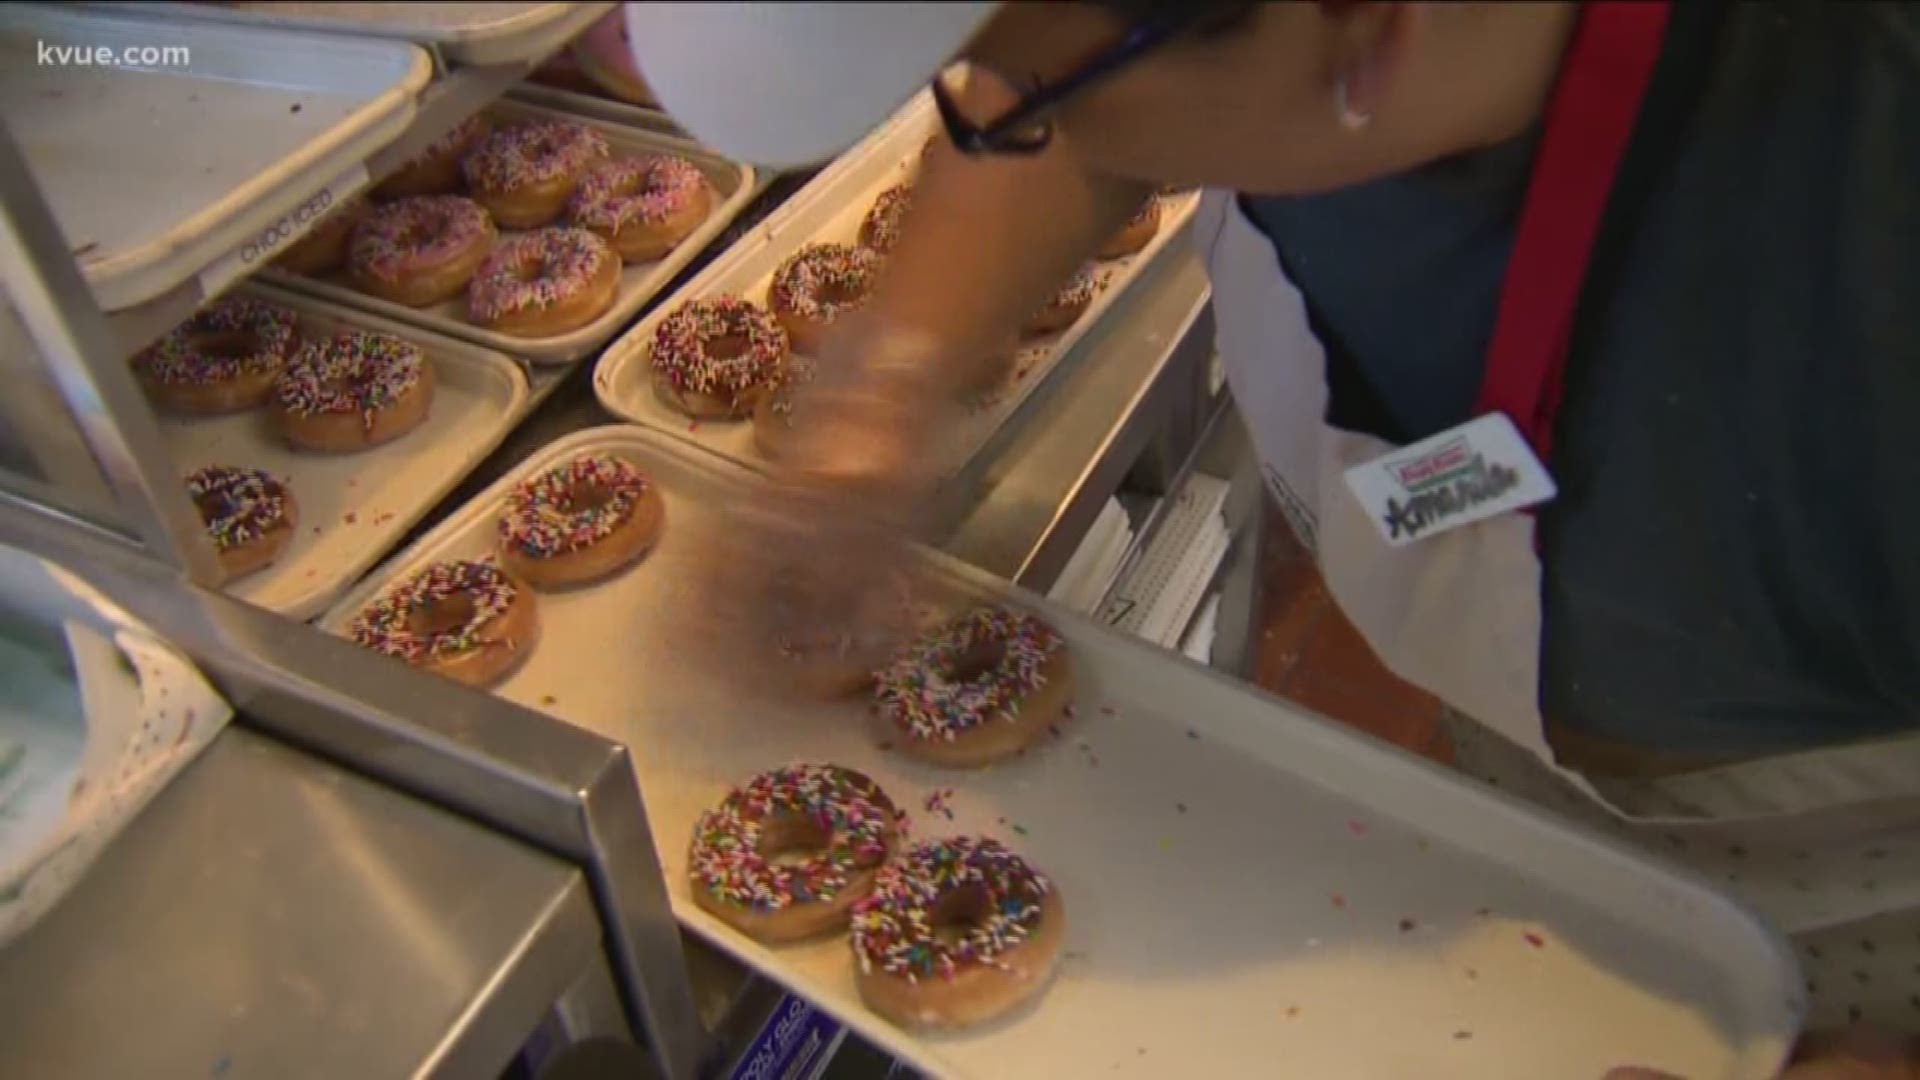 What do doughnuts and the Salvation Army have in common? Molly Oak found out.